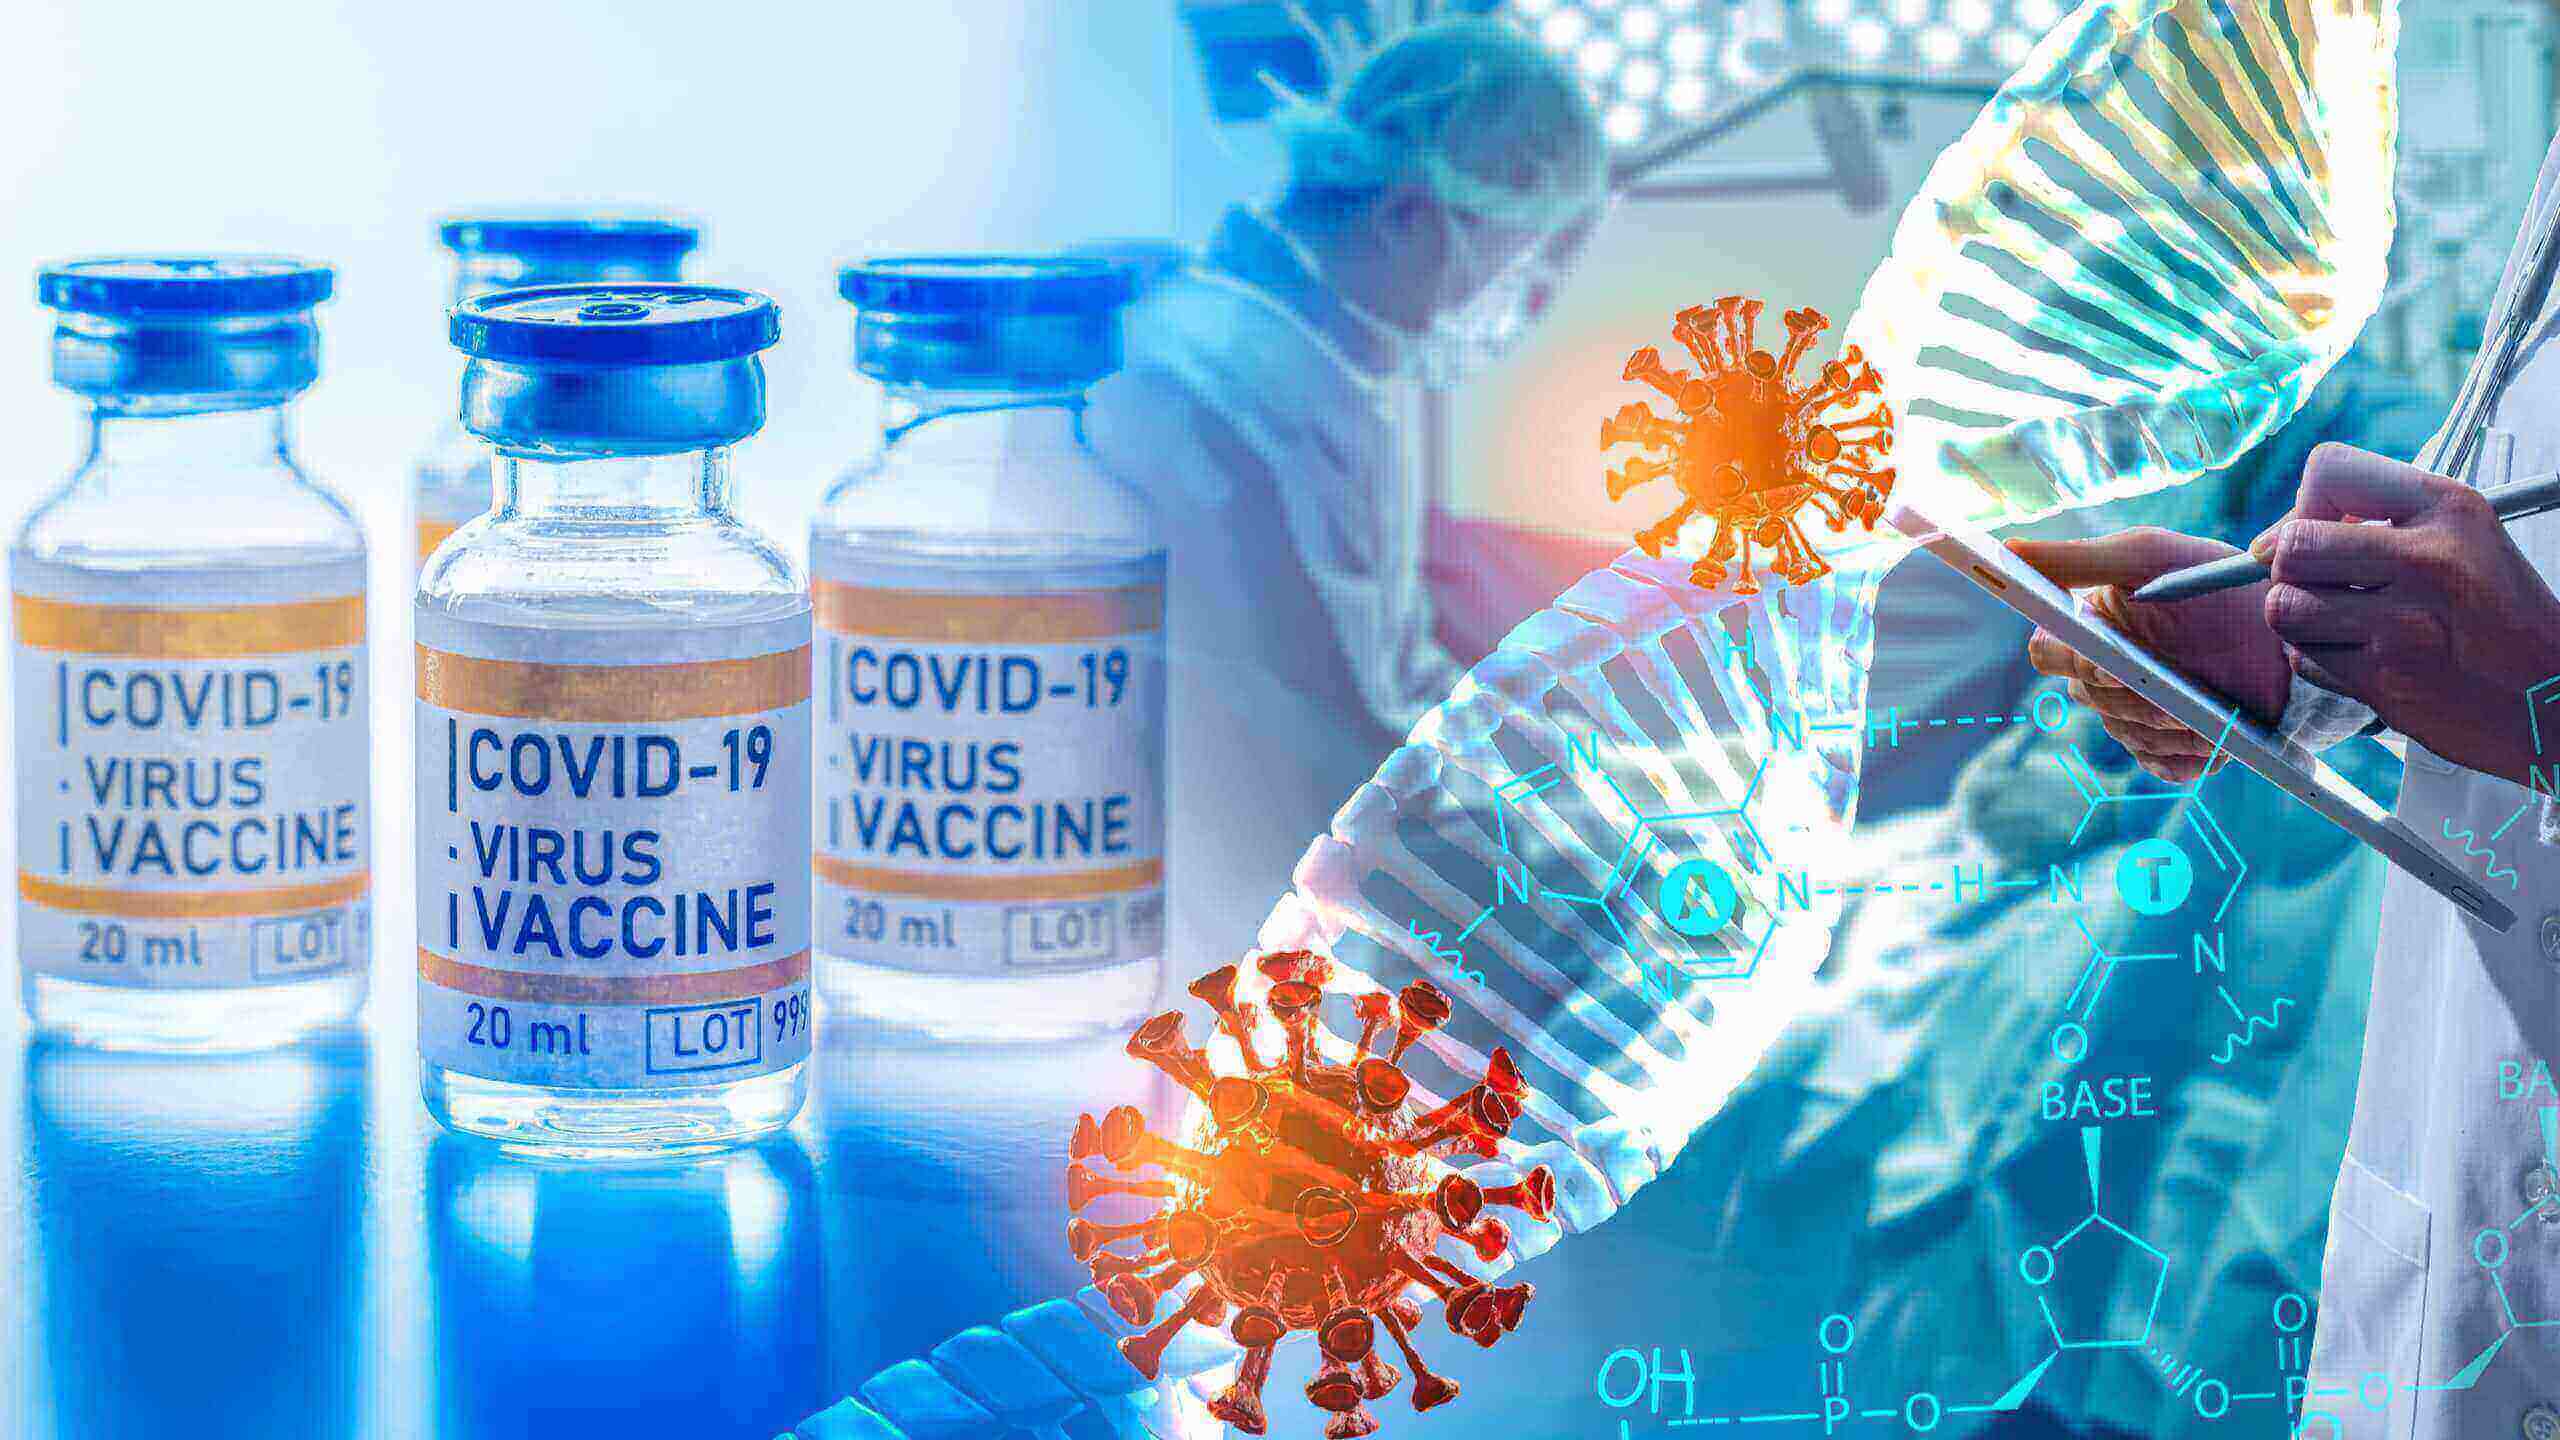 COVID 19 Vaccine - The Much-Awaited Potion for Real Estate | Latest Coronavirus Vaccine Update